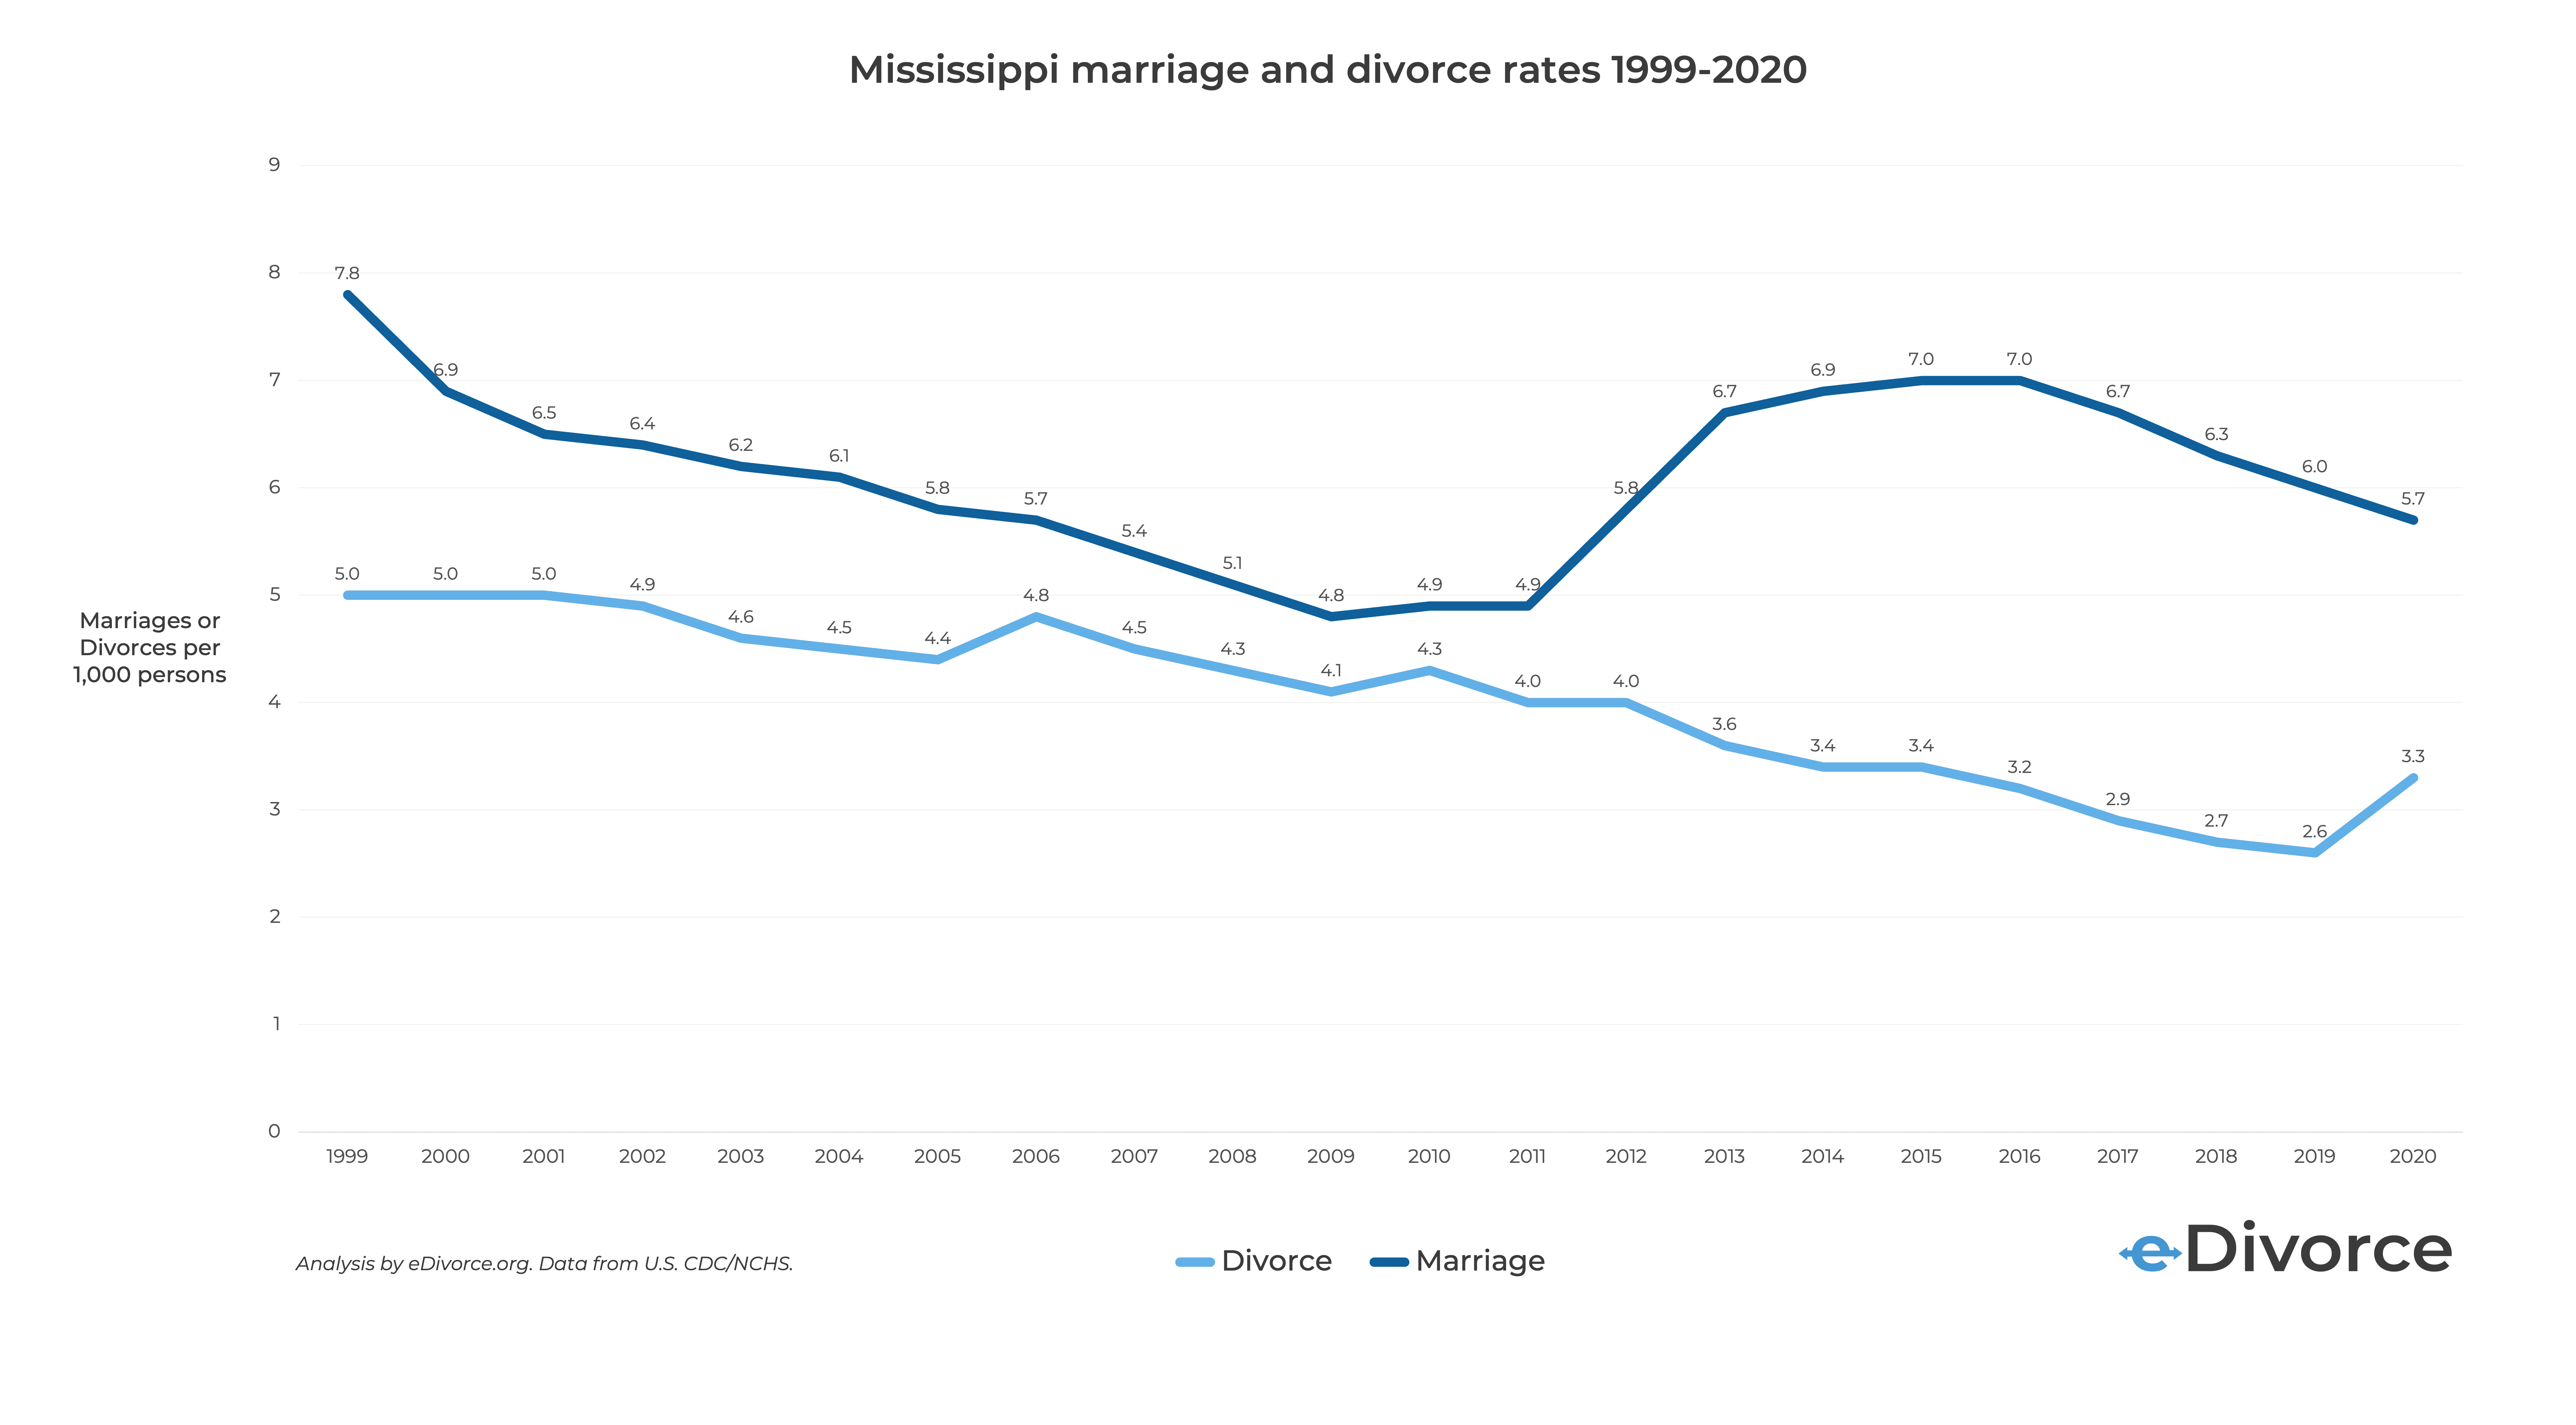 Line chart of Mississippi divorce and marriage rates over time